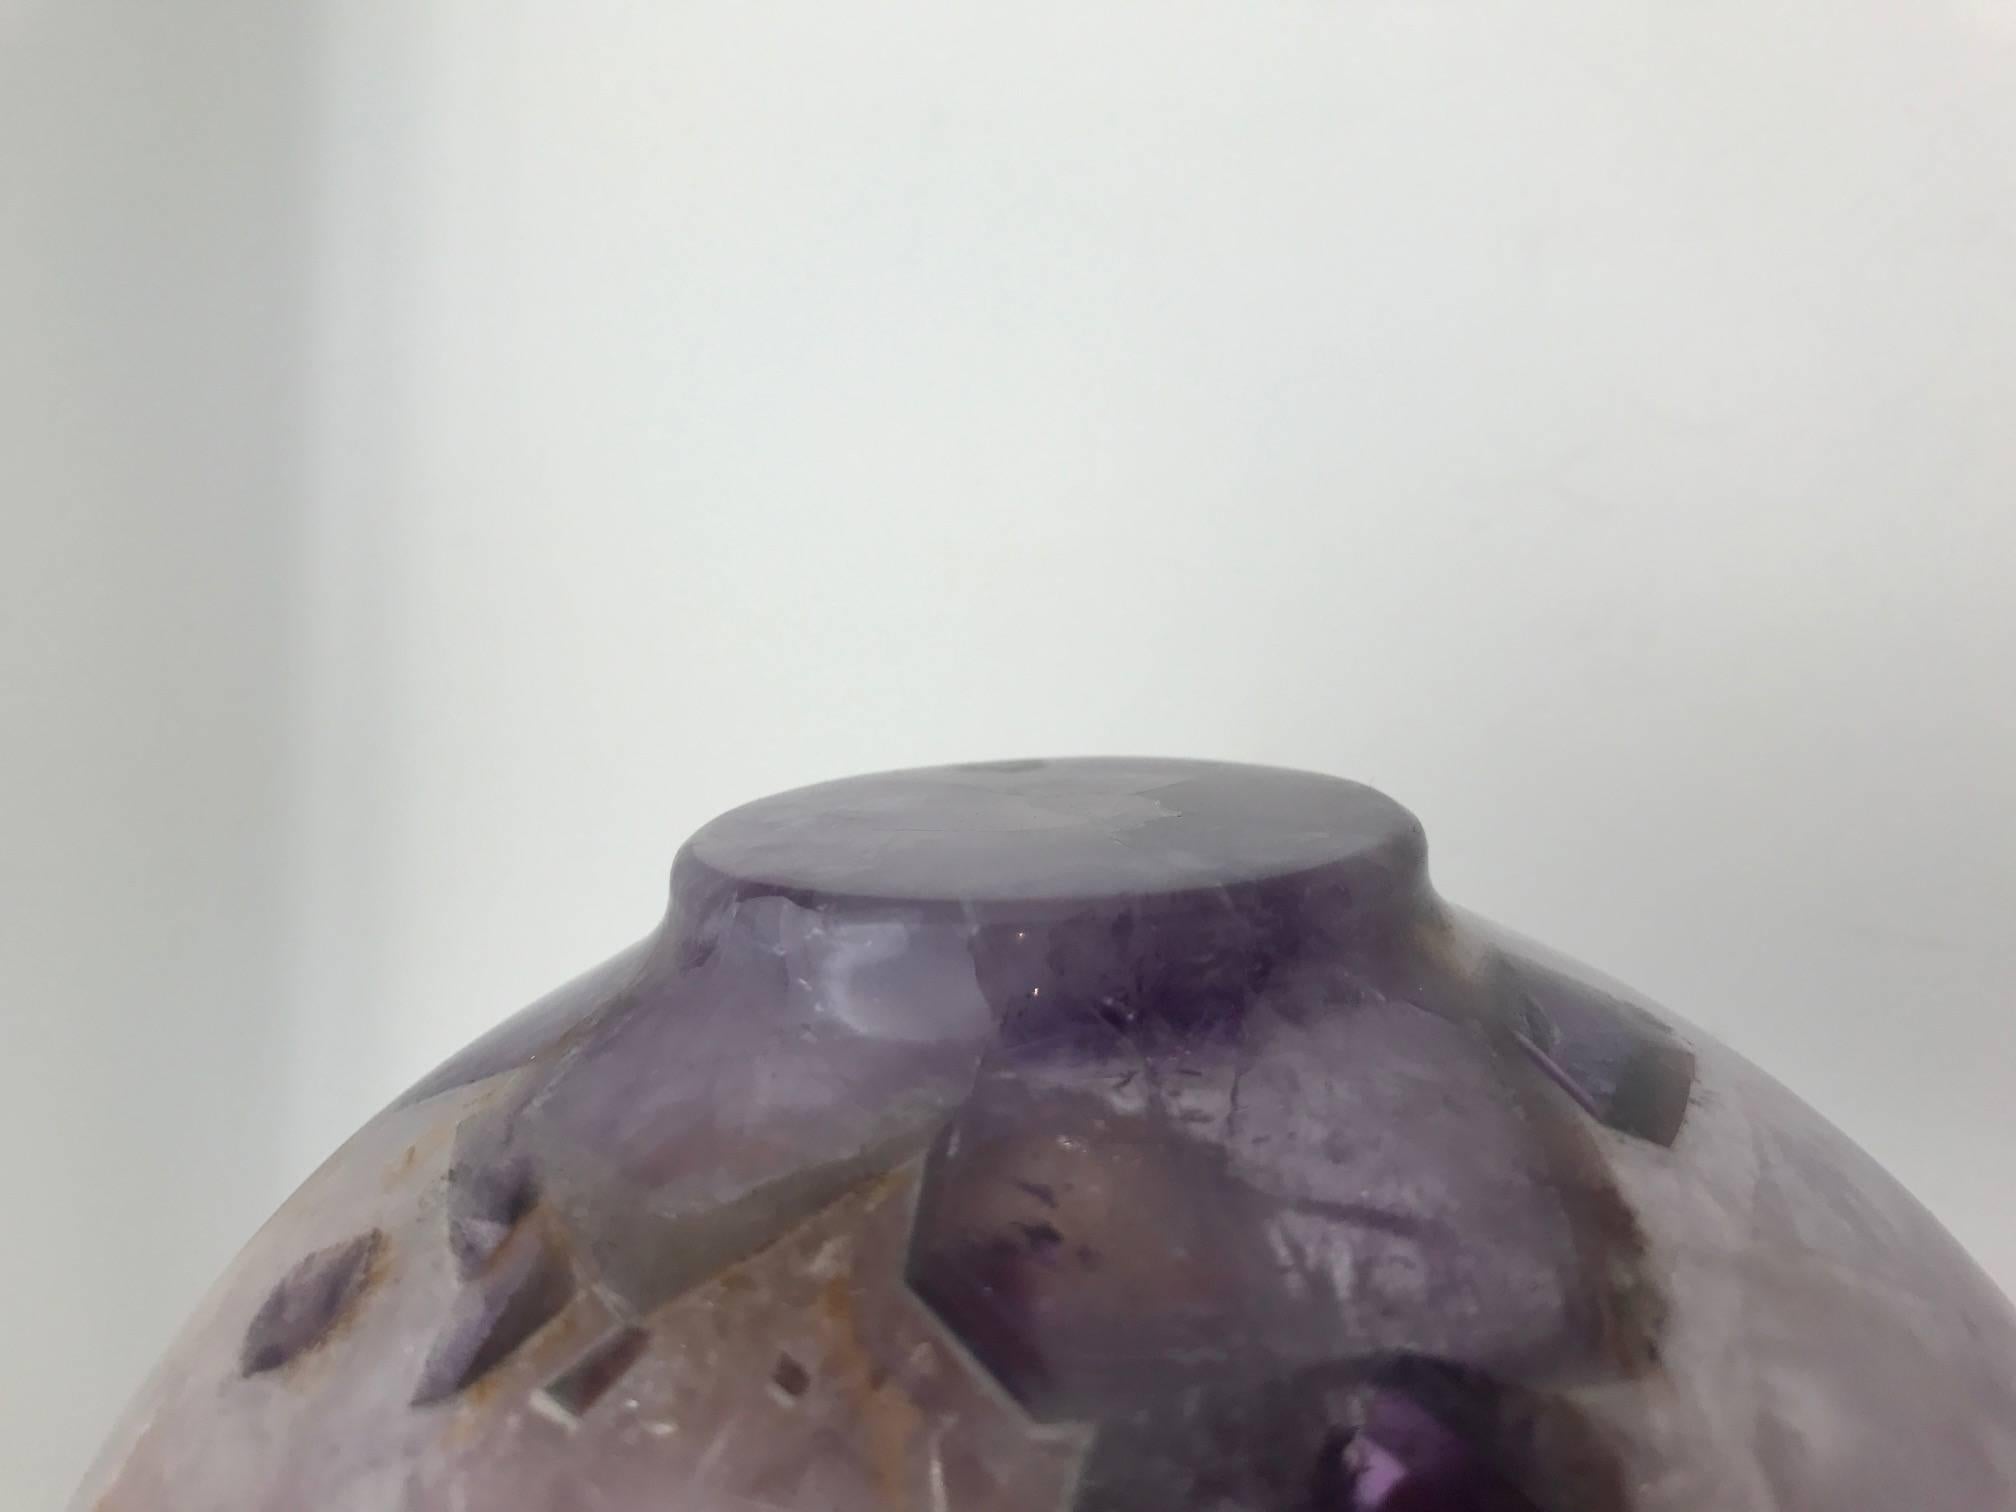 Indian Large Hand-Carved Semi-Precious Gemstone Amethyst Bowl from India